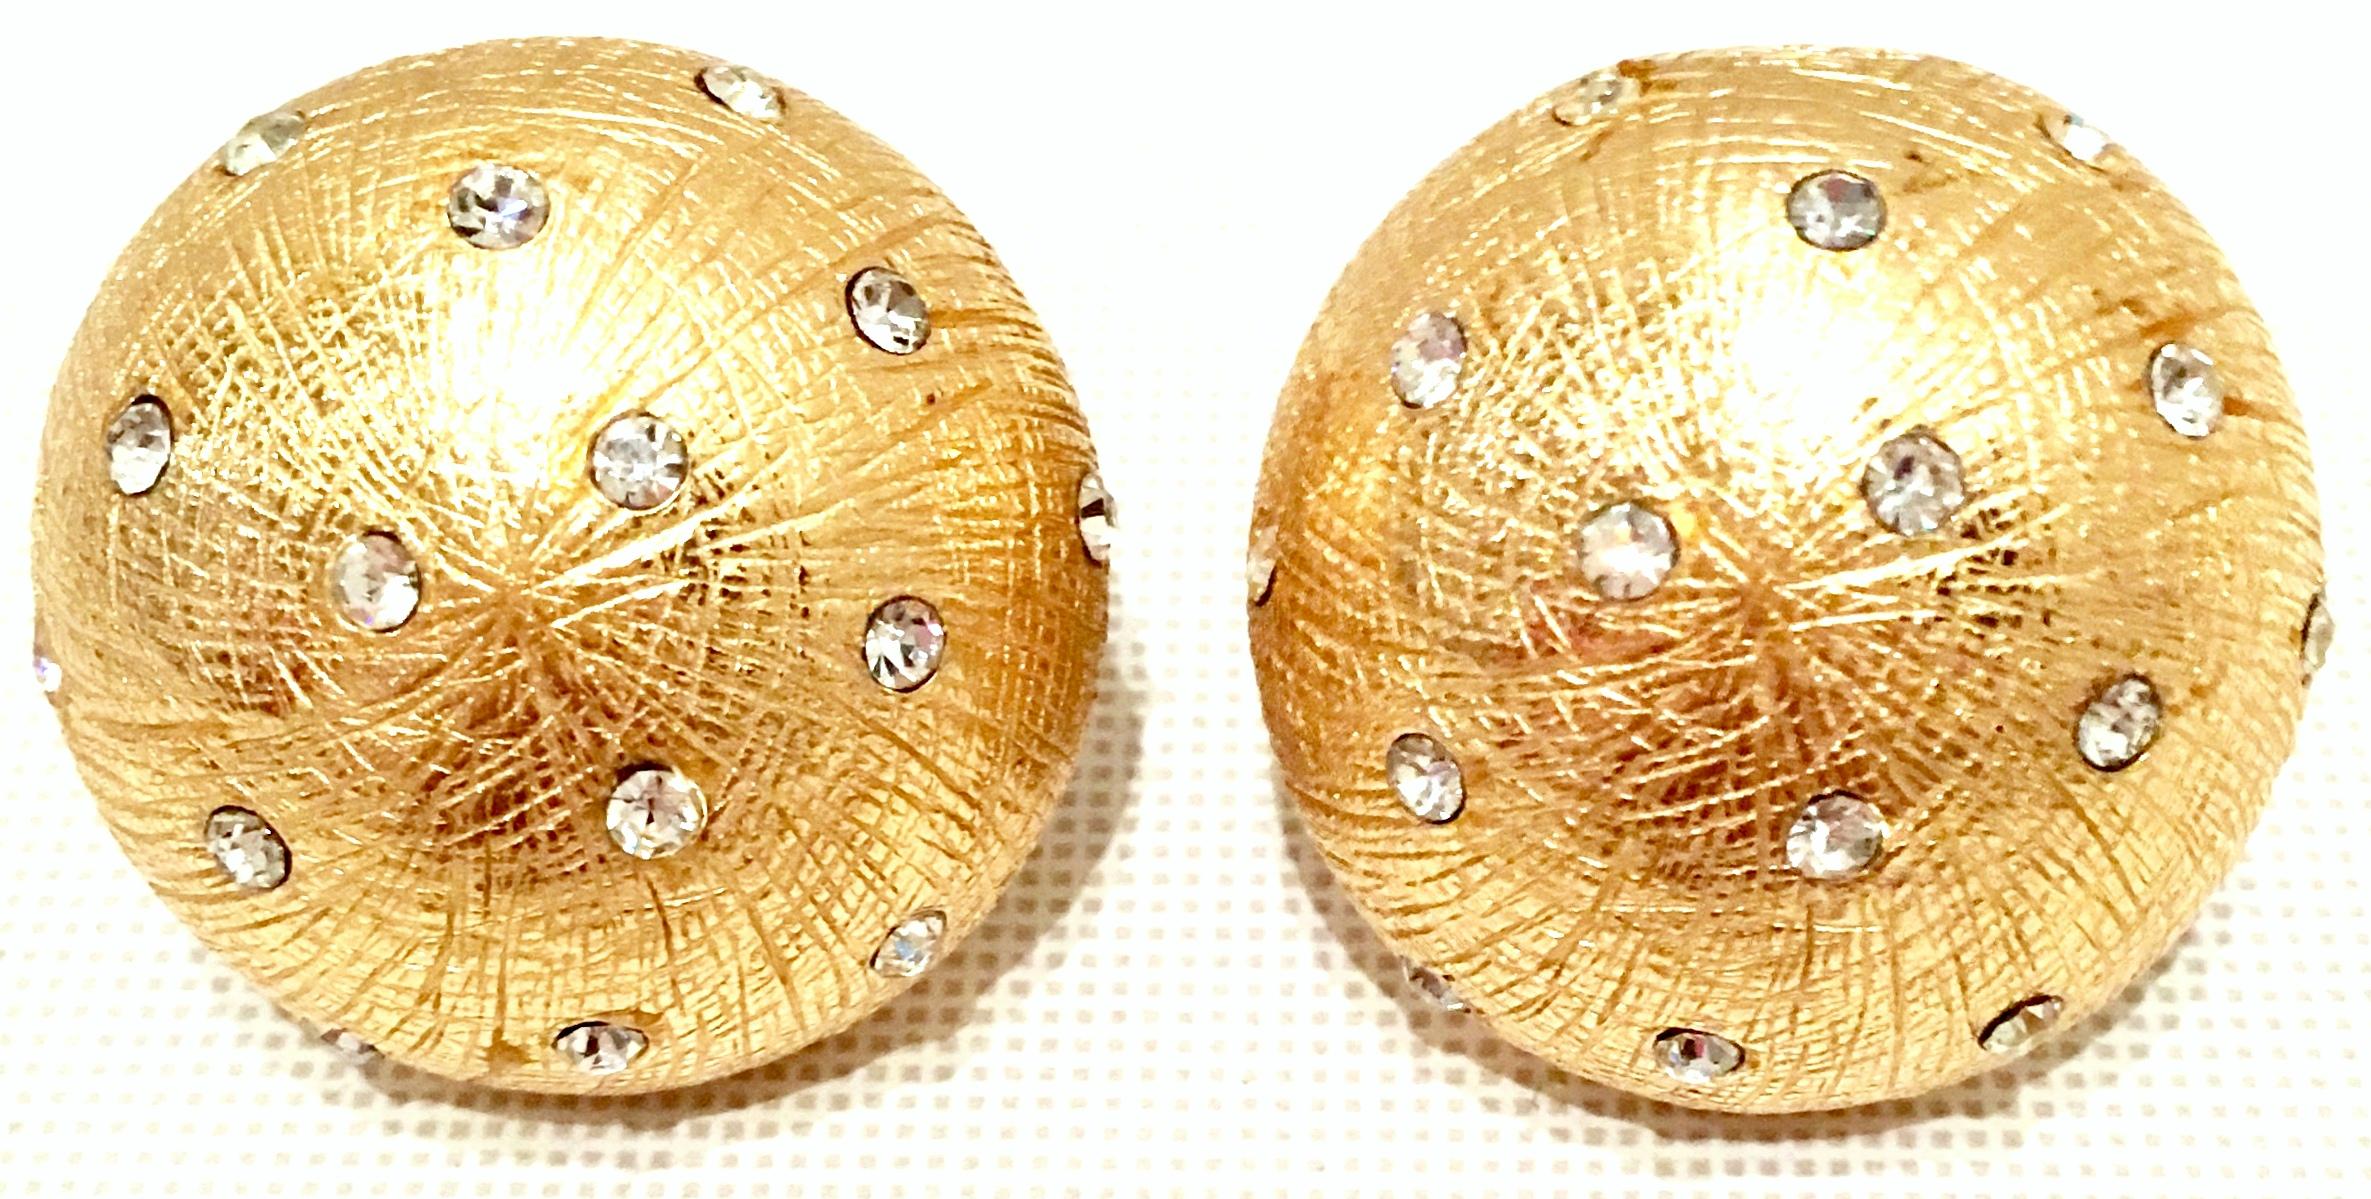 20th Century Brushed Gold Plate & Swarovski Crystal Clip Style Earrings By, Christian Dior. These Dior brushed gold plate with diminutive brilliant crystal clear Swarovski stones are a mushroom cap shape and both signed on the underside, Christian